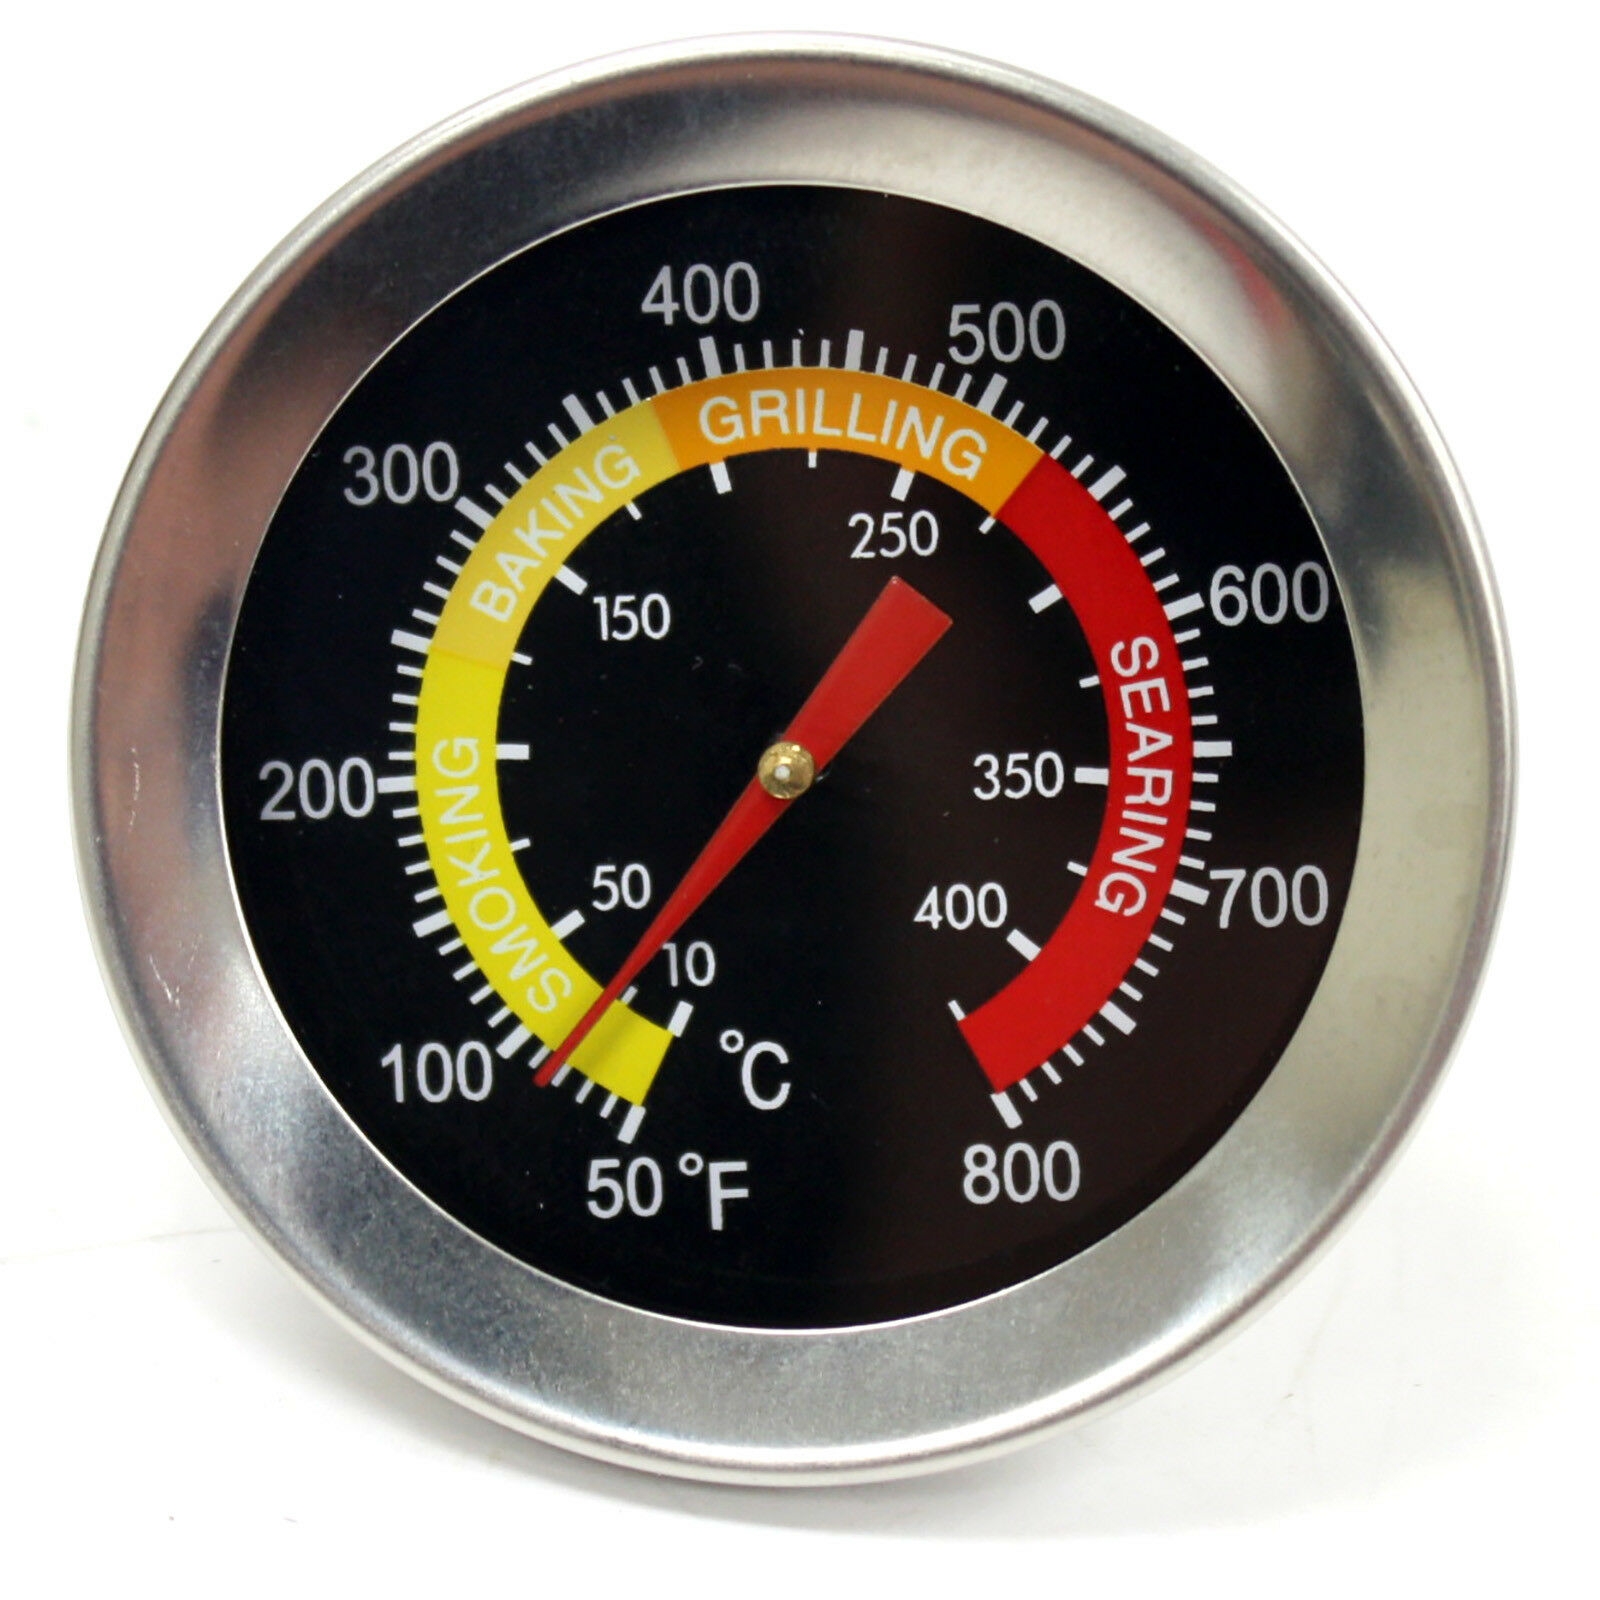 100 to 1000 Degrees Fahrenheit D DOLITY BBQ Barbecue Smoker Grill Thermometer Temperature Gauge 